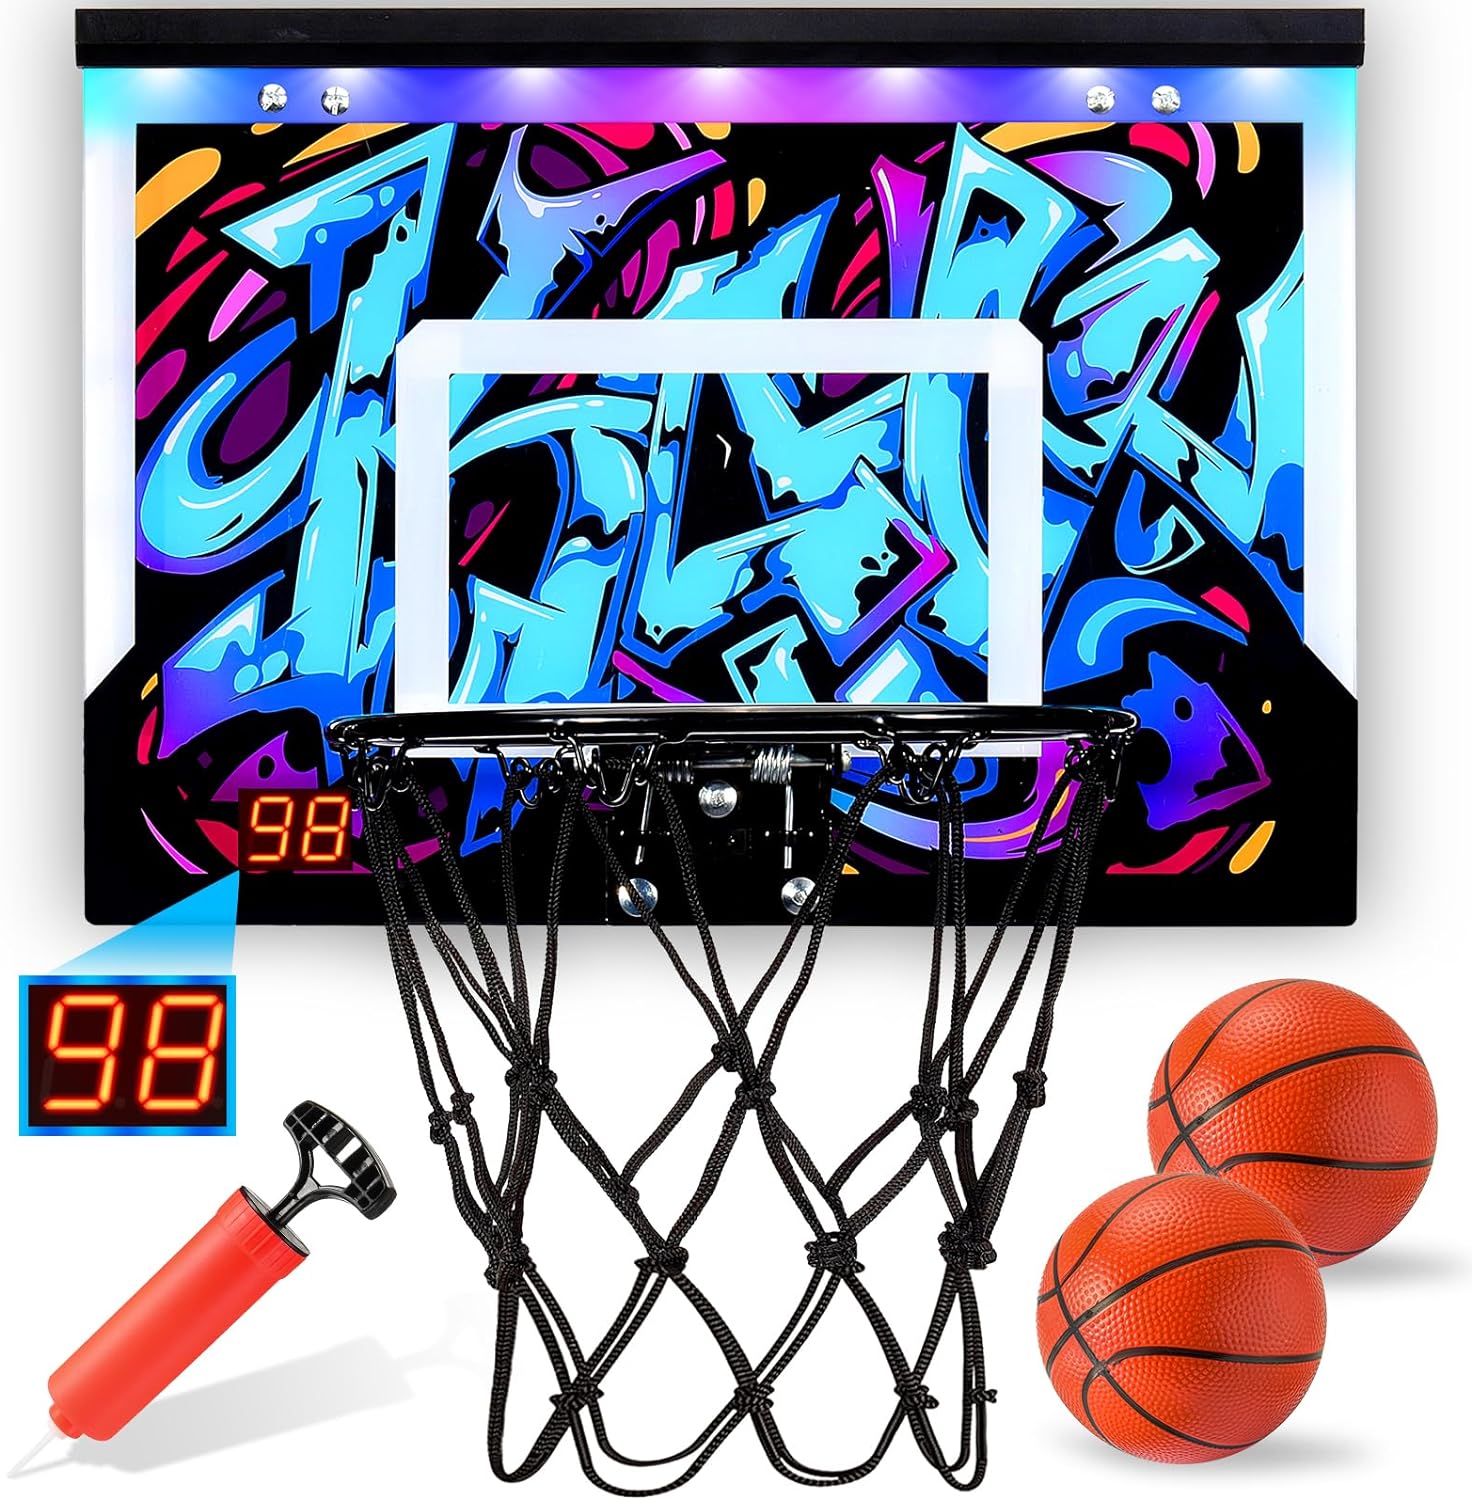 DASTION-99 Mini Basketball Hoop Indoor for Kids LED Basketball Hoop Toys for 3 4 5 6 7-12 Year Old Boys Teens Easter Birthday Valentine Gifts for Boys Age 3-12 with 2 Balls Cool Light